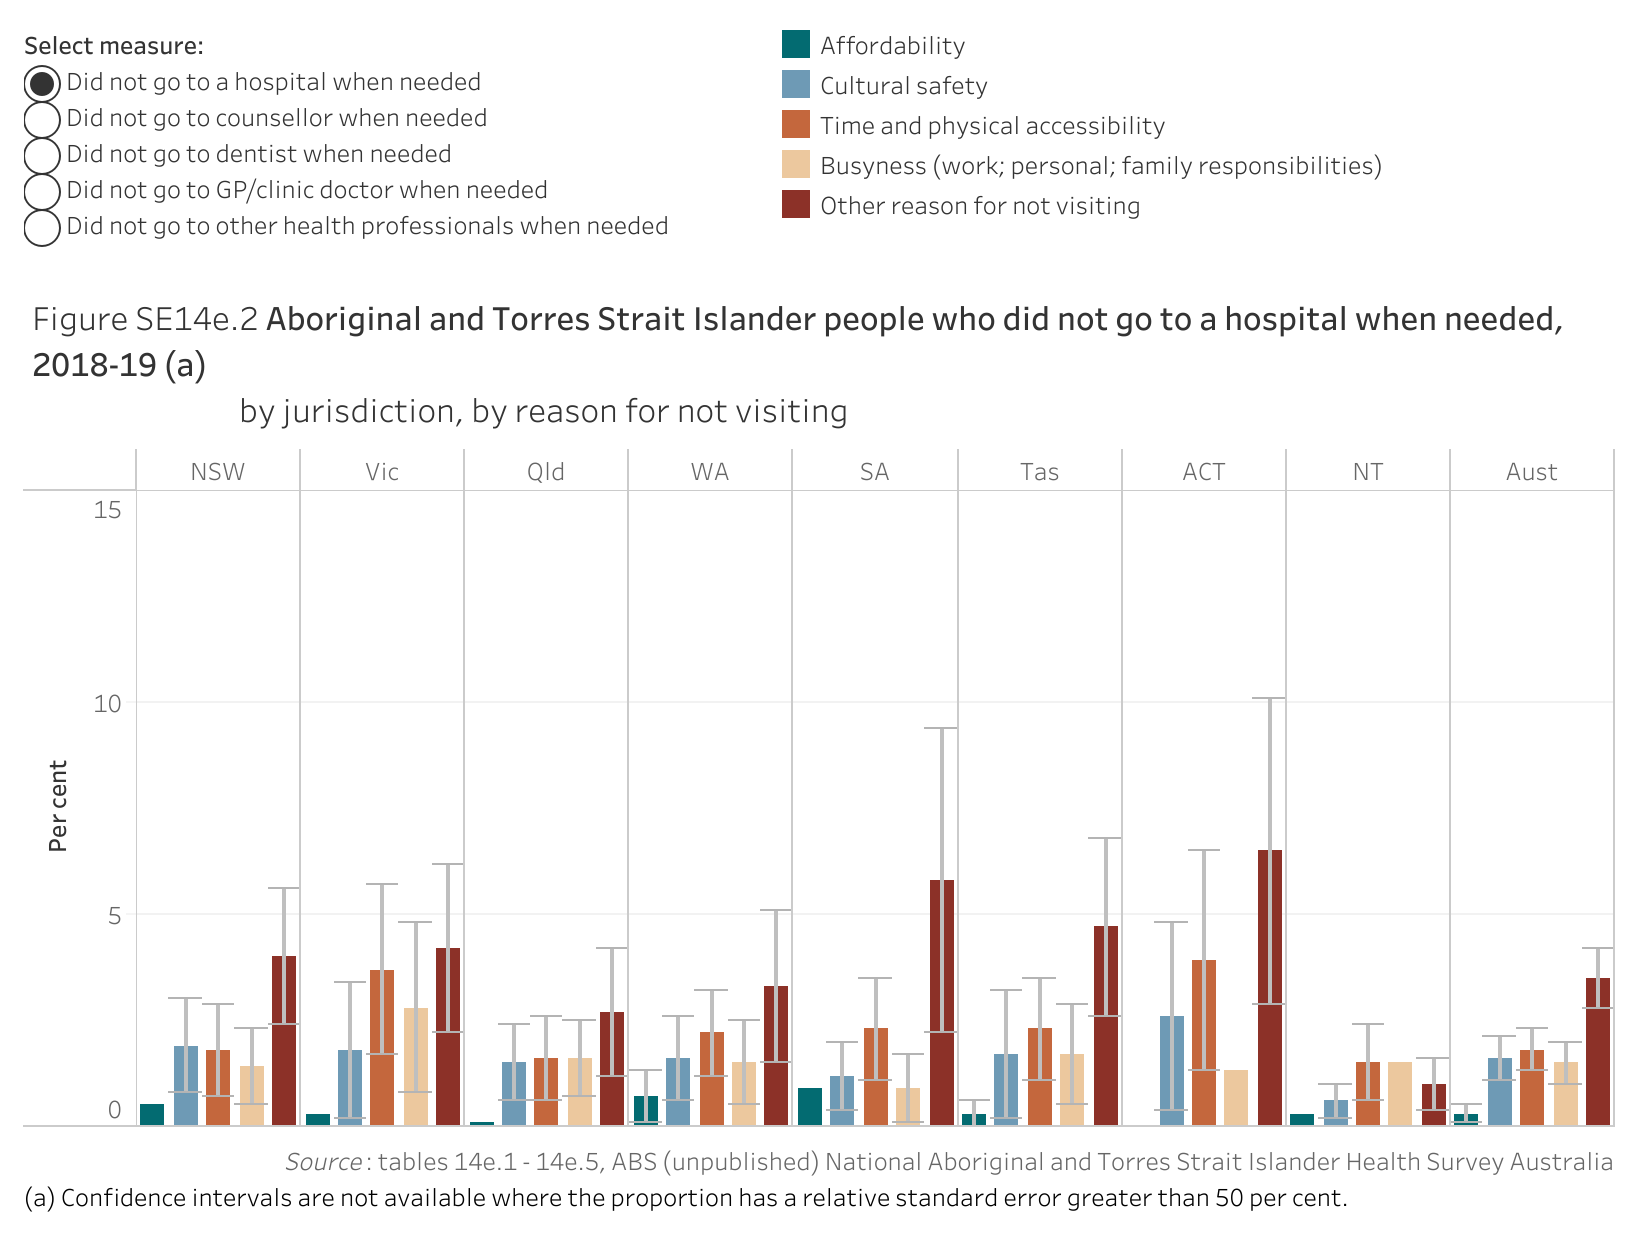 Figure SE14e.2 shows Aboriginal and Torres Strait Islander people who did not go to a hospital when needed, 2018-19, by jurisdiction, by reason for not visiting. Confidence intervals are not available where the proportion has a relative standard error greater than 50 per cent. More details can be found within the text near this image.